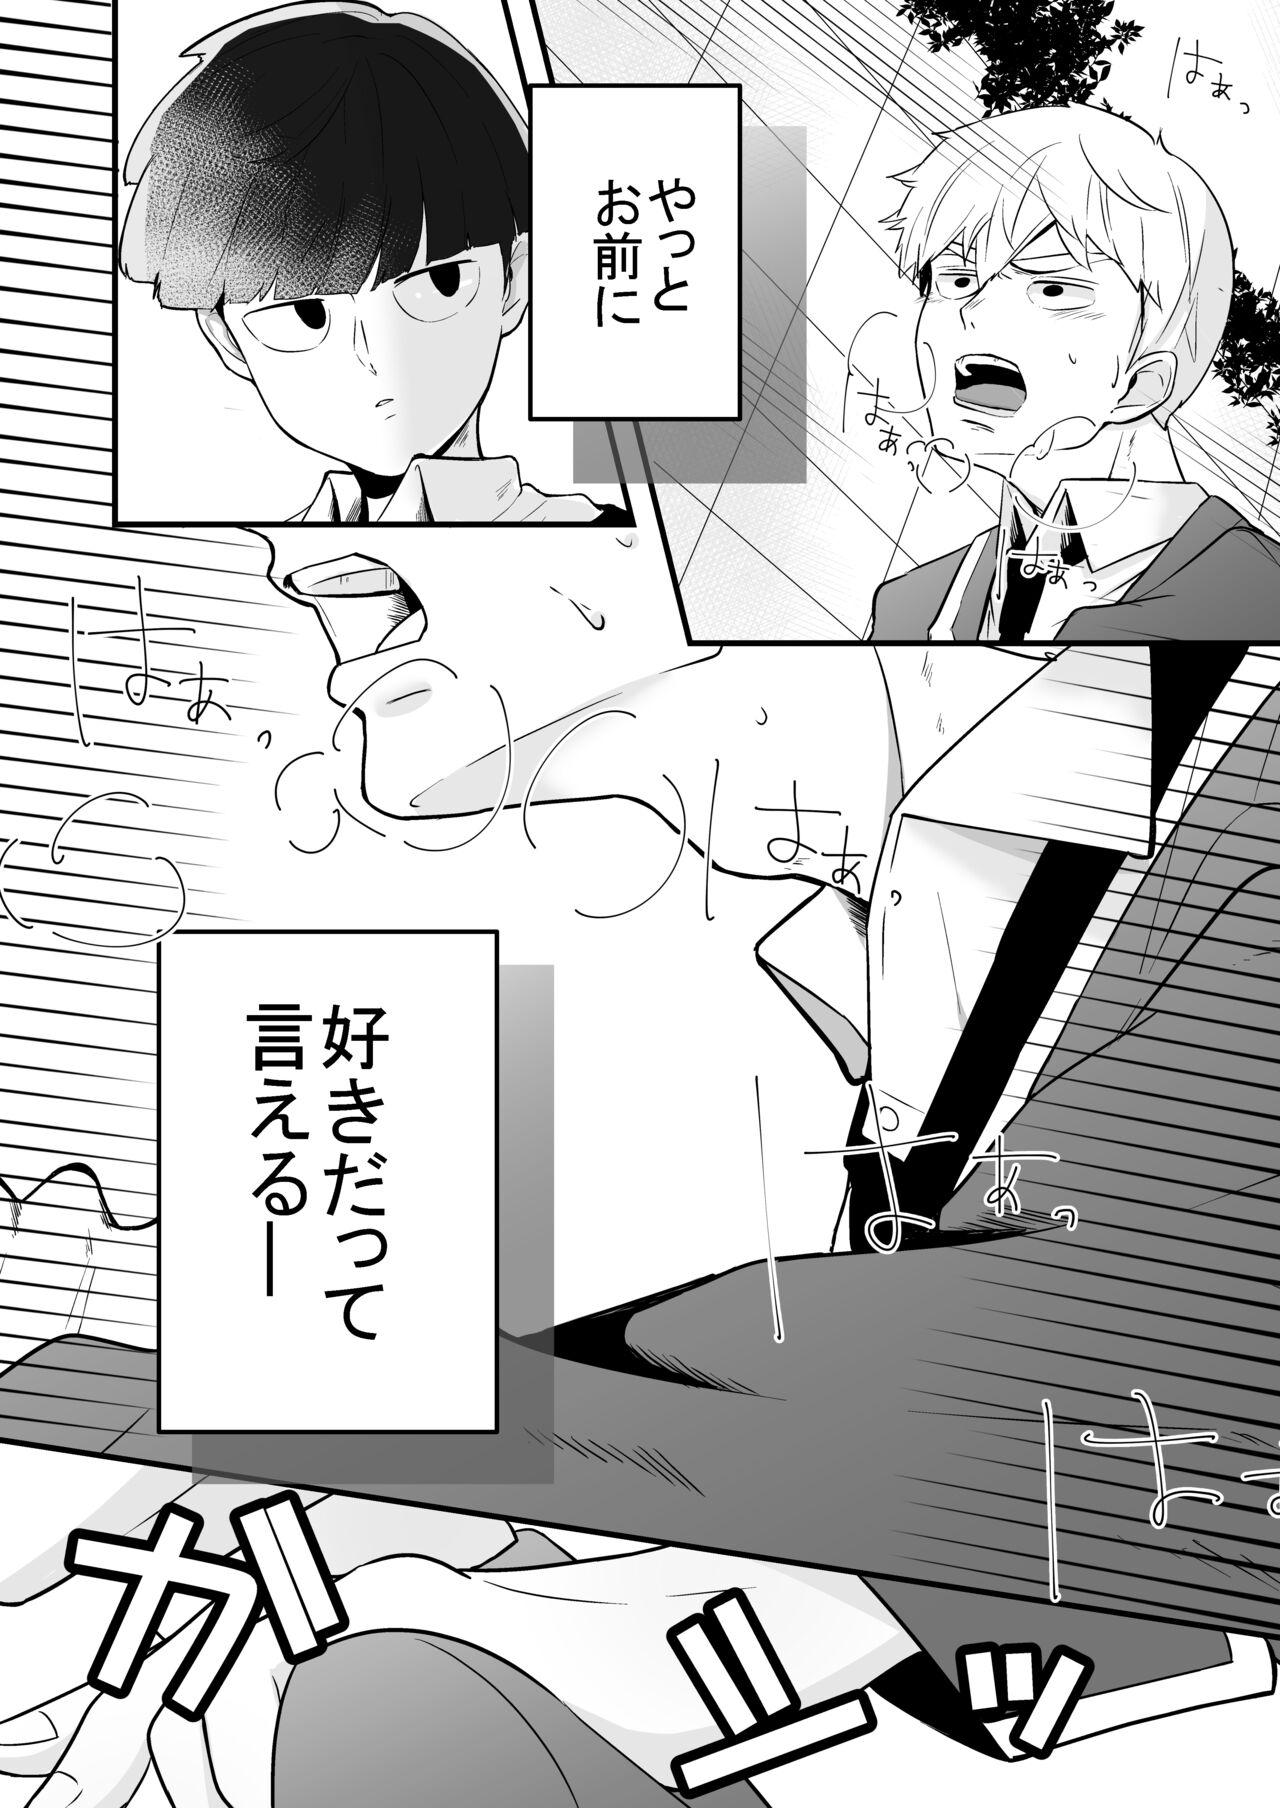 Submissive Dearest love - Mob psycho 100 Peru - Page 12